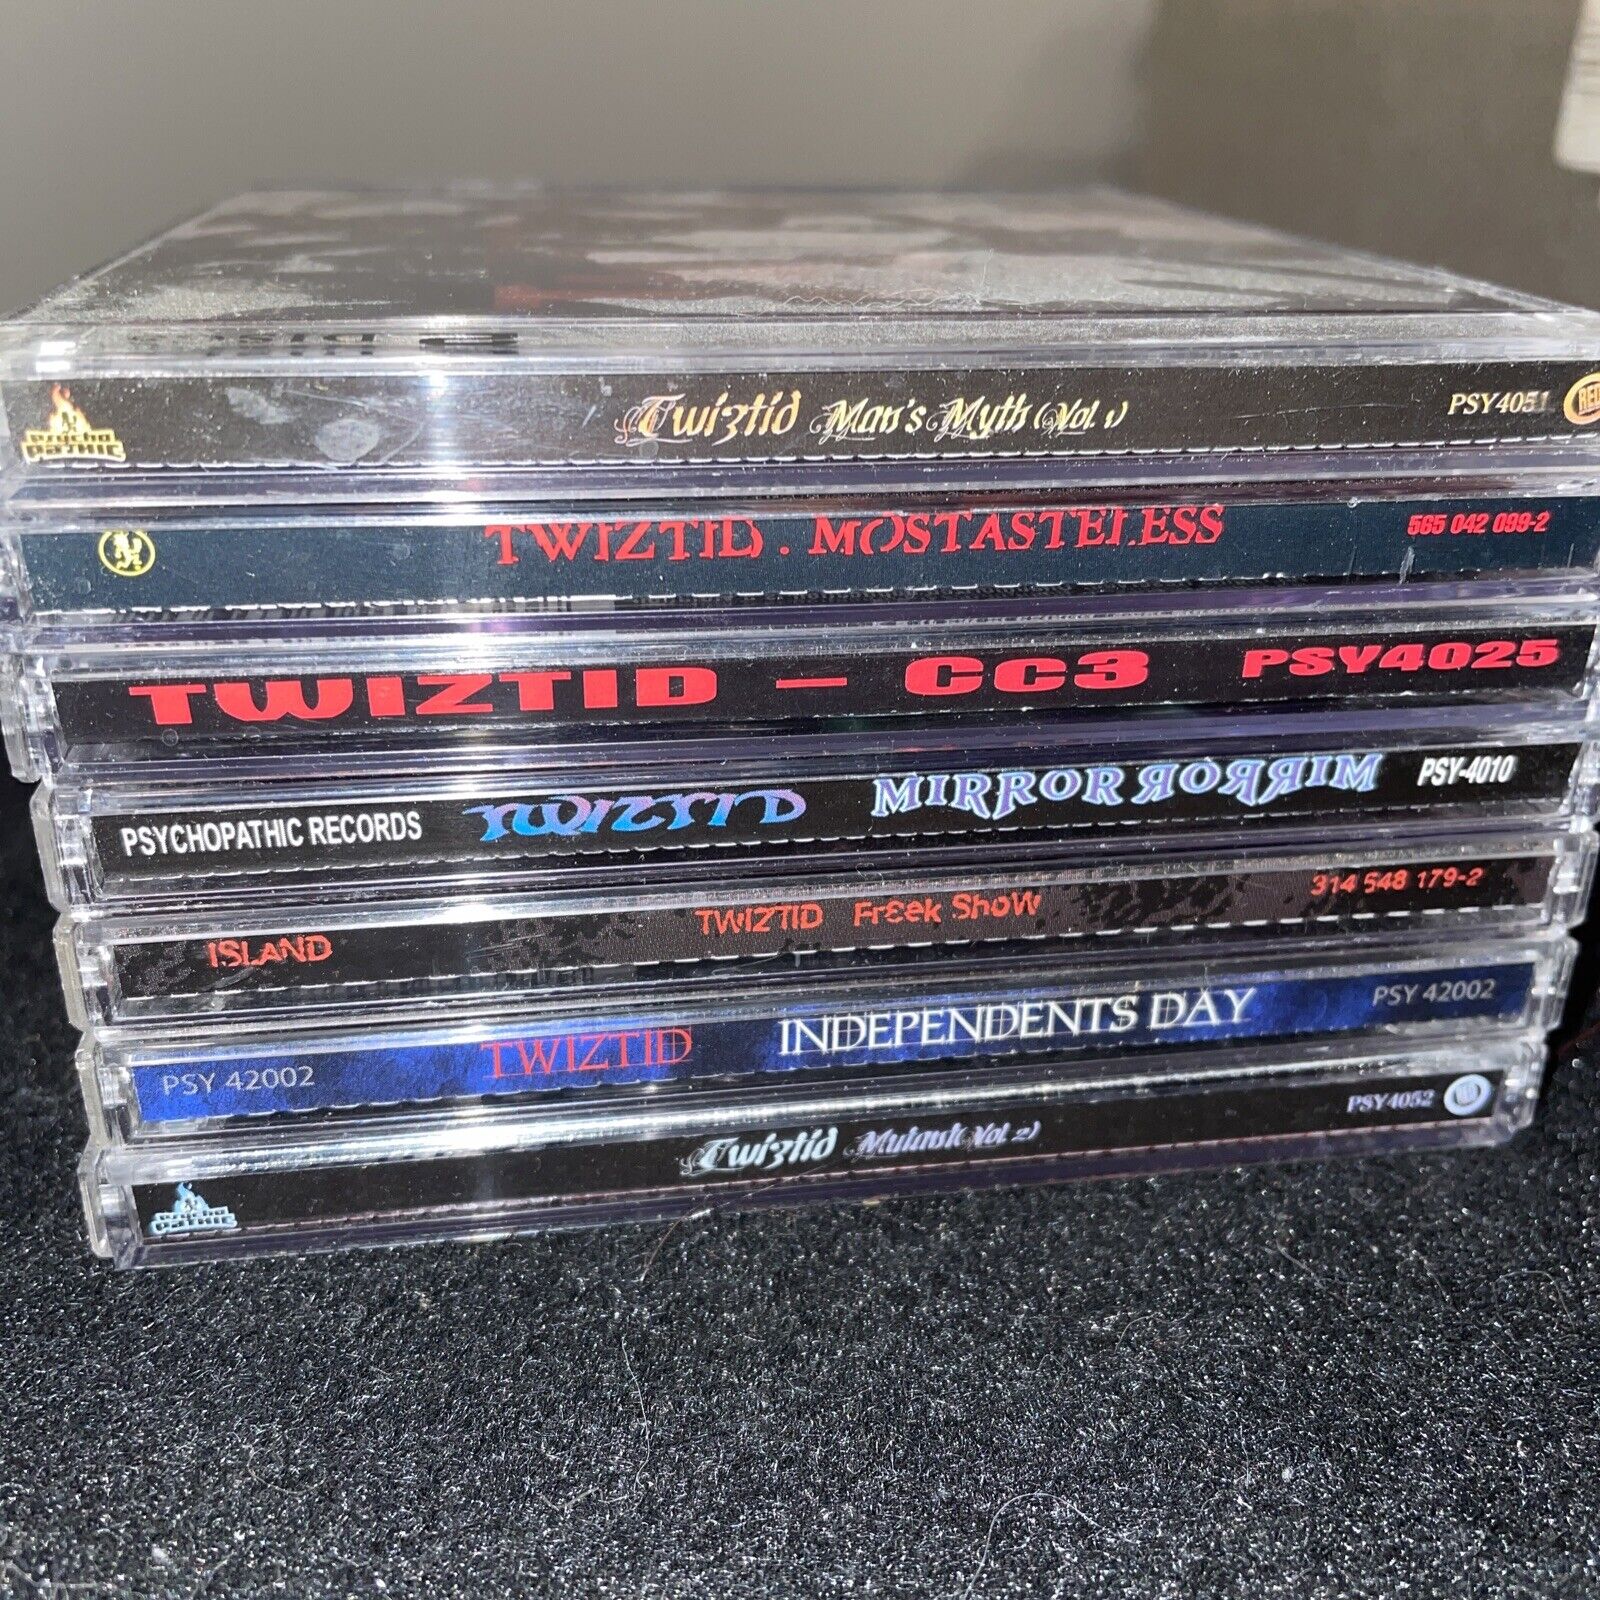 TWIZTID • Man’s Myth Mostasteless CC3 Cryptic Collection Mirror Freek Show MORE